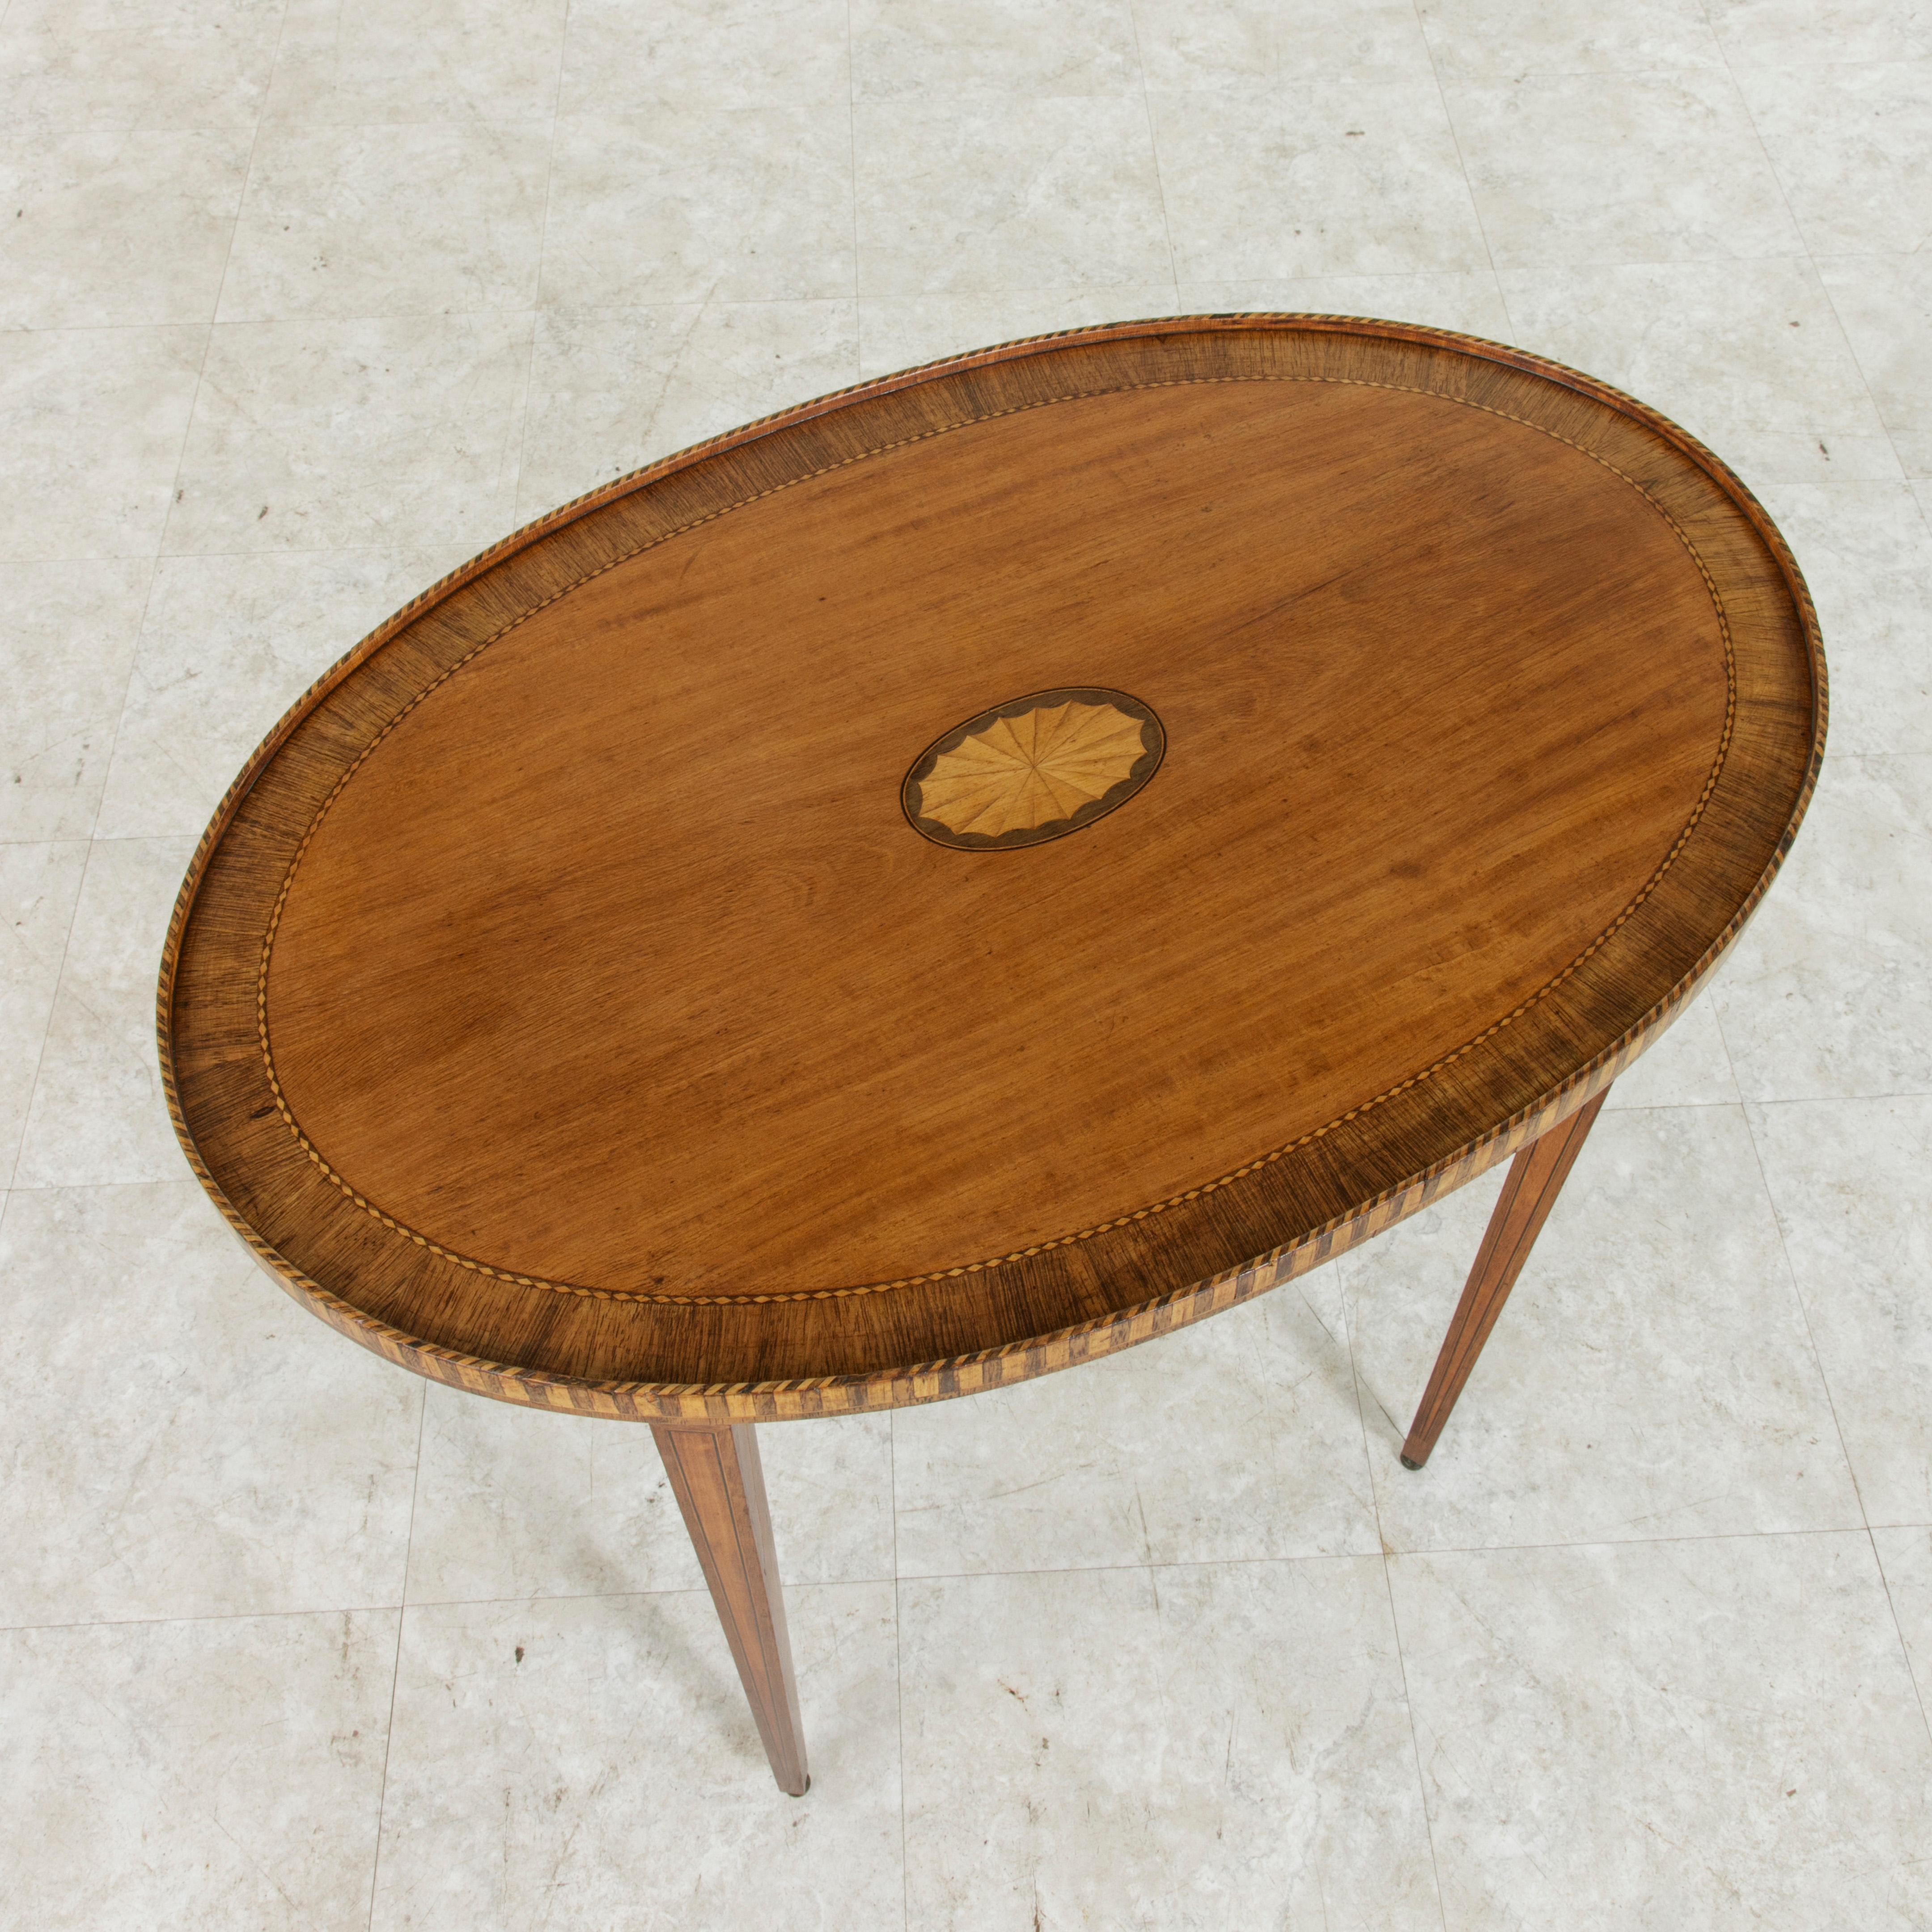 This early 20th century French neoclassic oval walnut marquetry side table features a striped rim around the edge and an inset diamond pattern border. Fine lines of inlaid lemon wood and ebonized pear wood frame the apron and tapered square legs